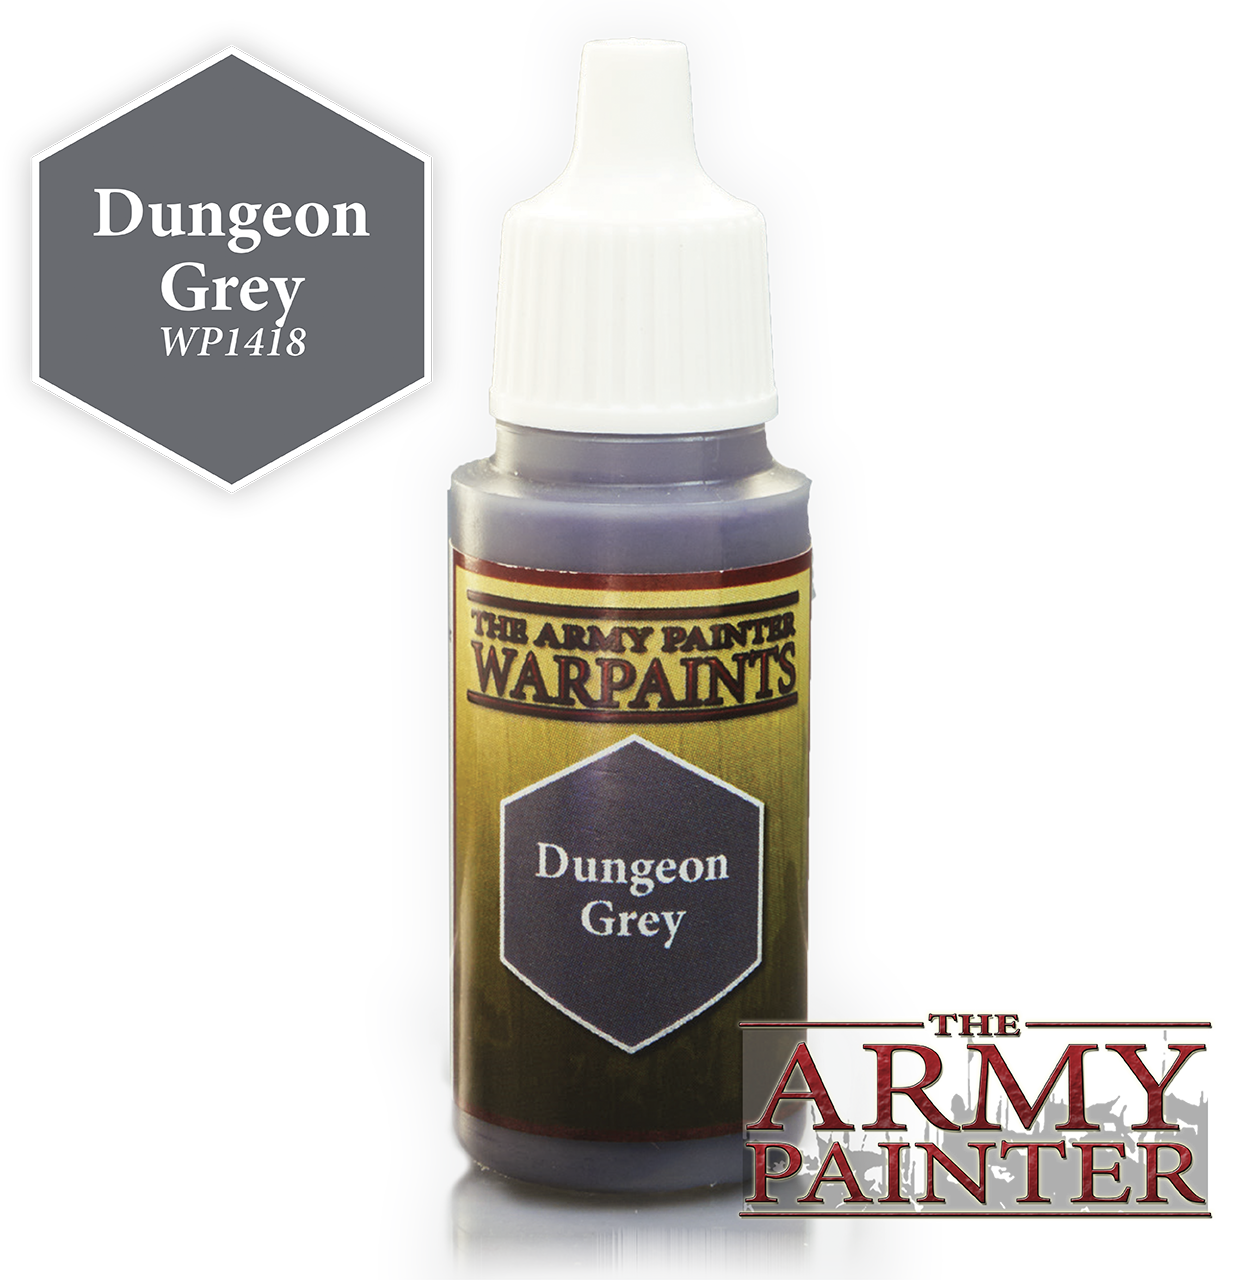 The ARMY PAINTER: Acrylics Warpaint - Dungeon Grey | Tacoma Games